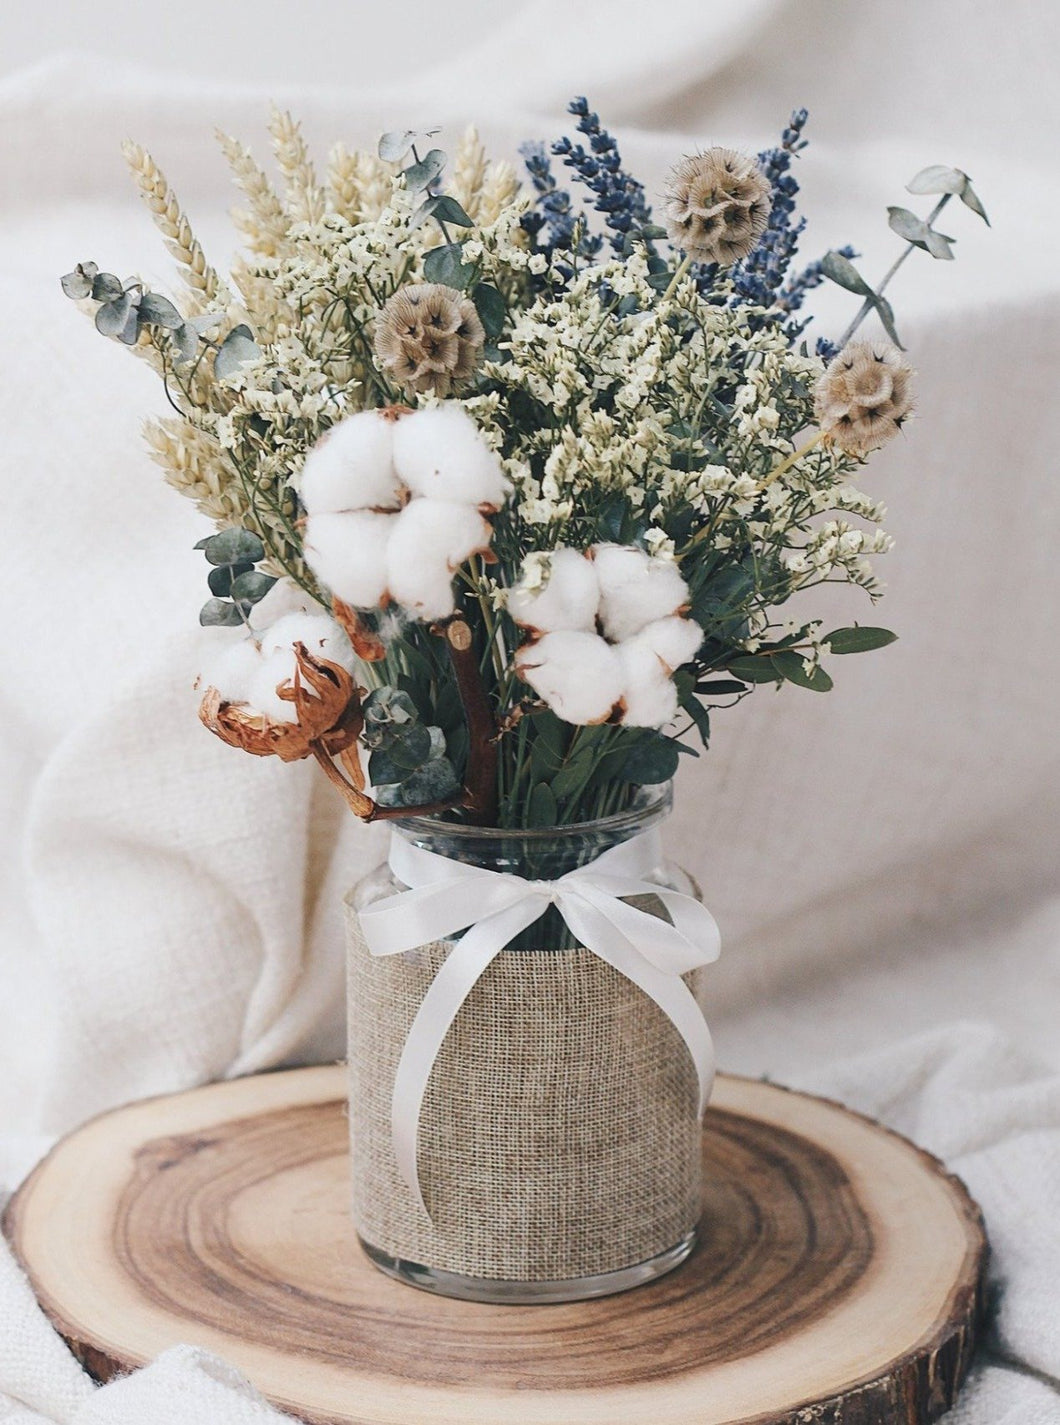 Dried Cotton Flower Bouquet with Lavender and Eucalyptus